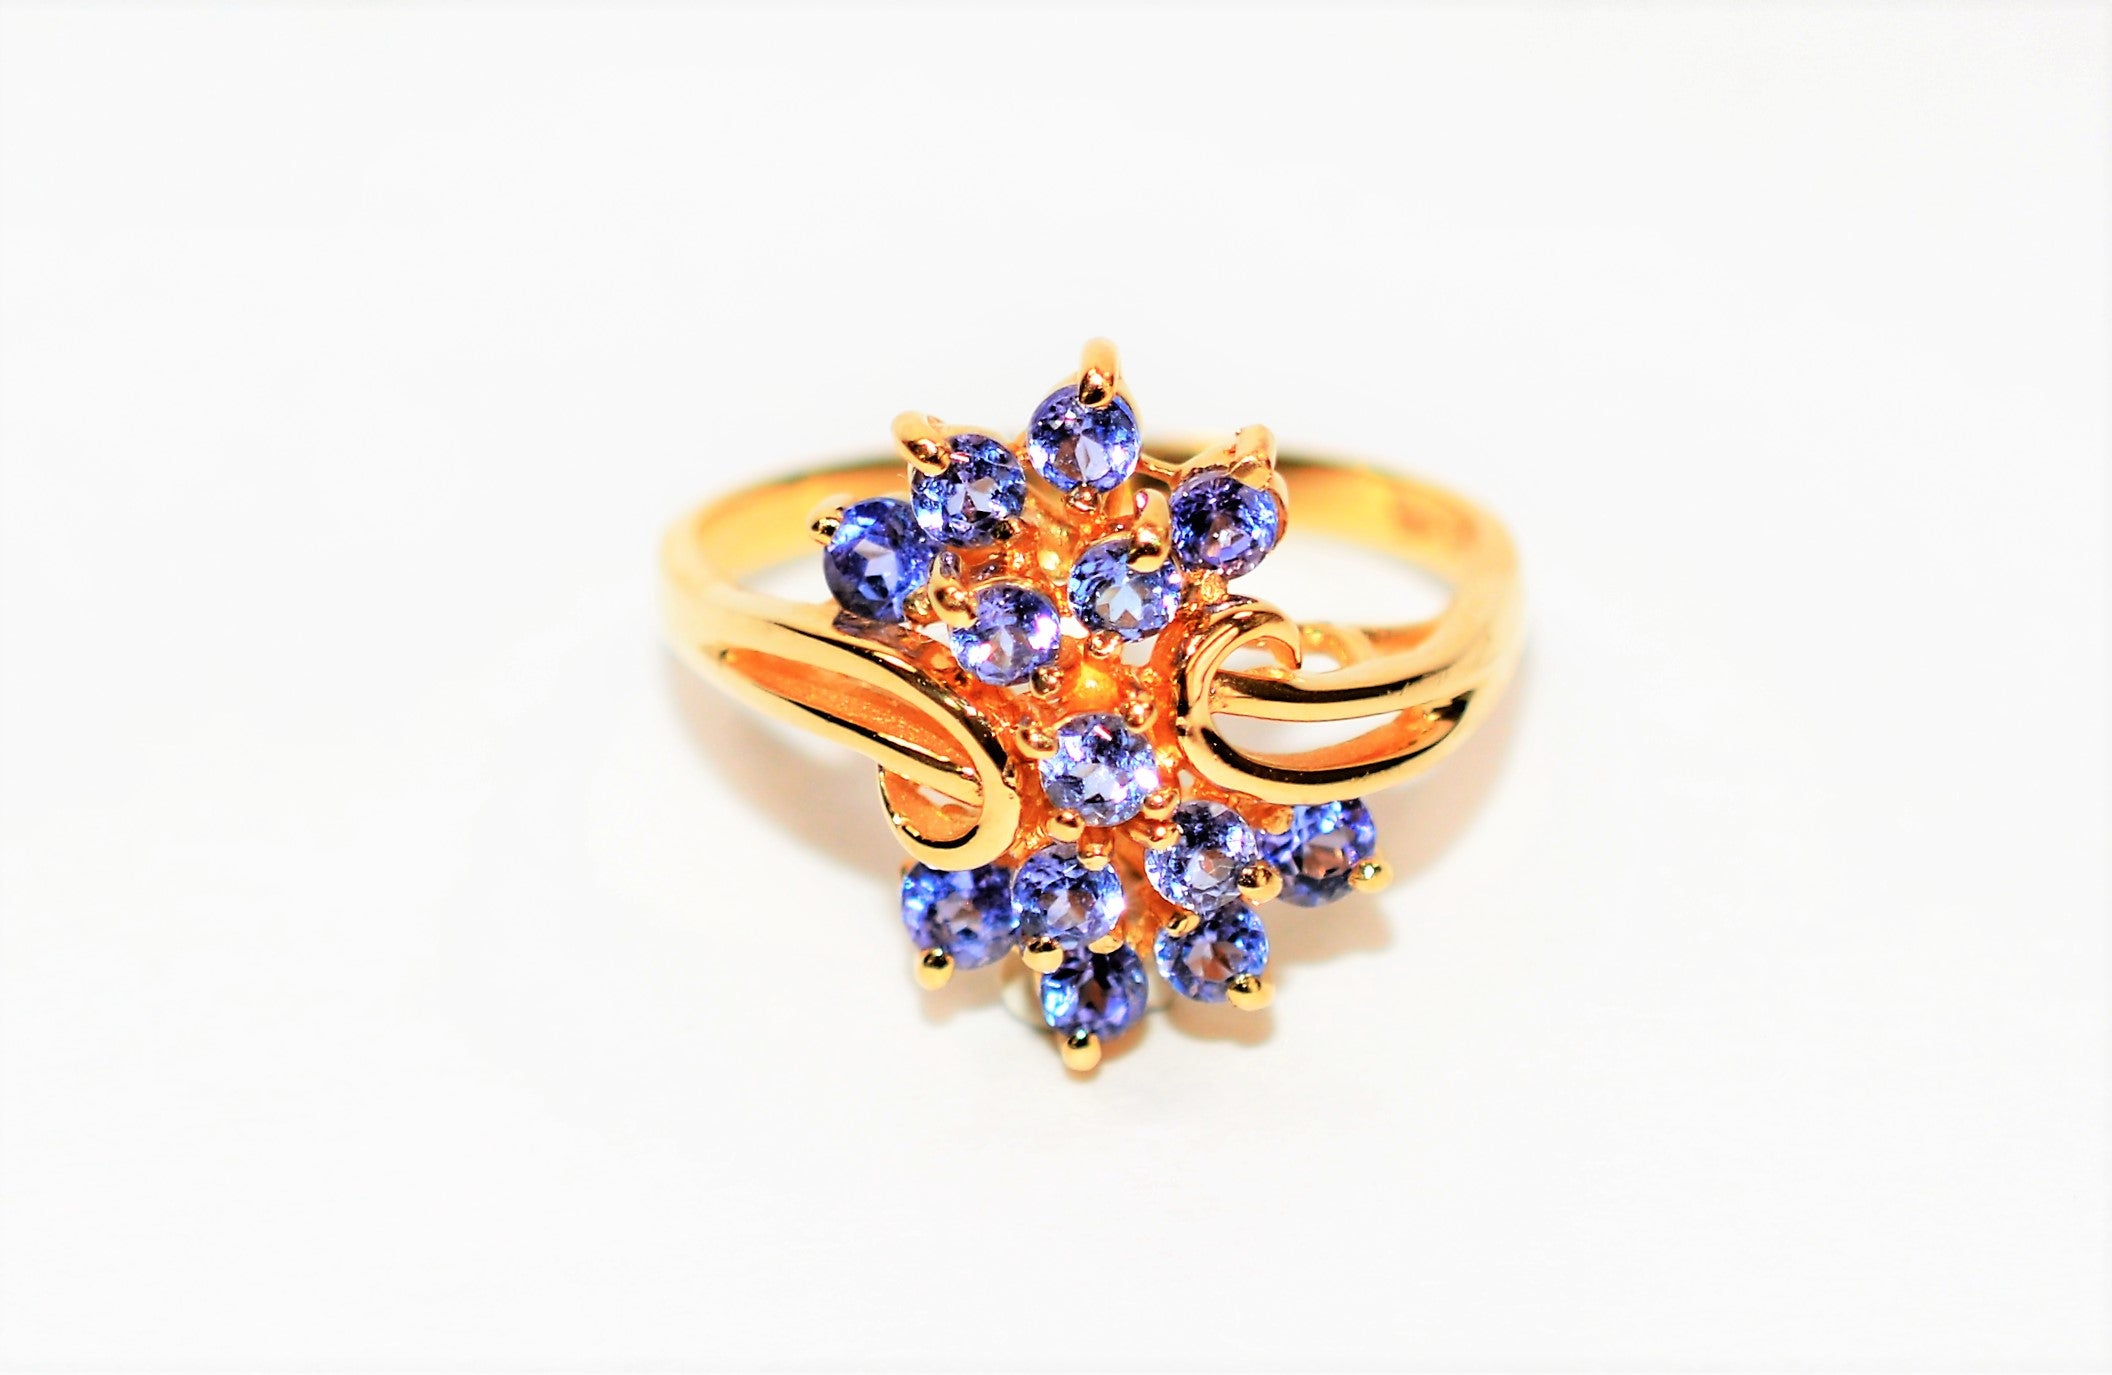 Natural Tanzanite Ring 14K Solid Gold 1.30tcw Cluster Ring Gemstone Ring December Birthstone Ring Statement Ring Cocktail Ring Fine Jewelry